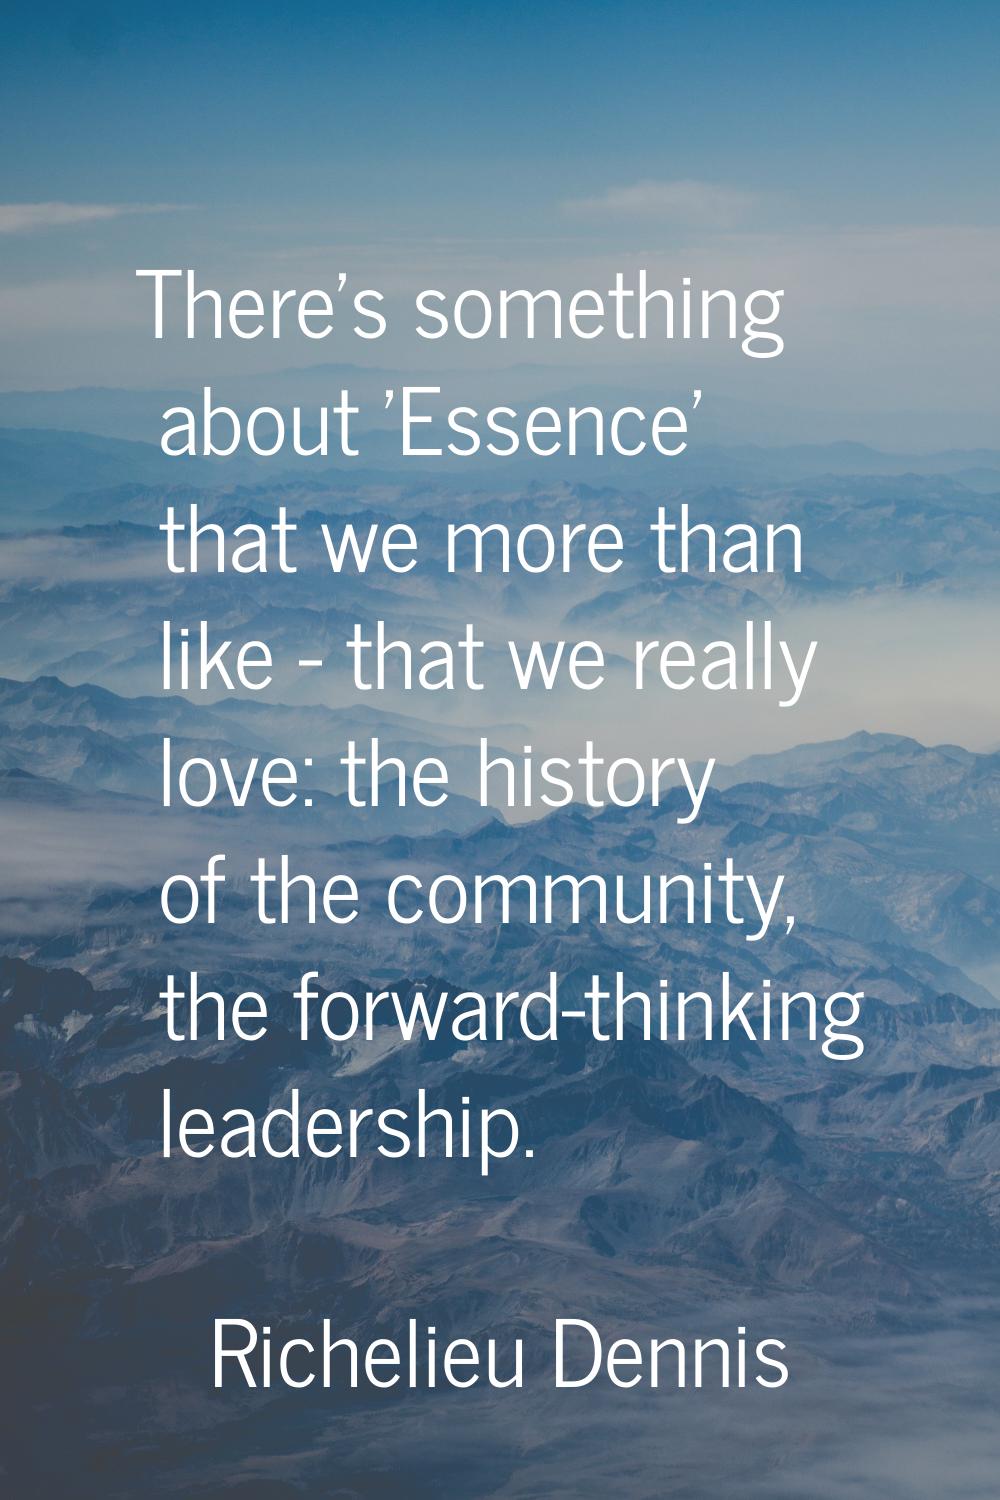 There's something about 'Essence' that we more than like - that we really love: the history of the 